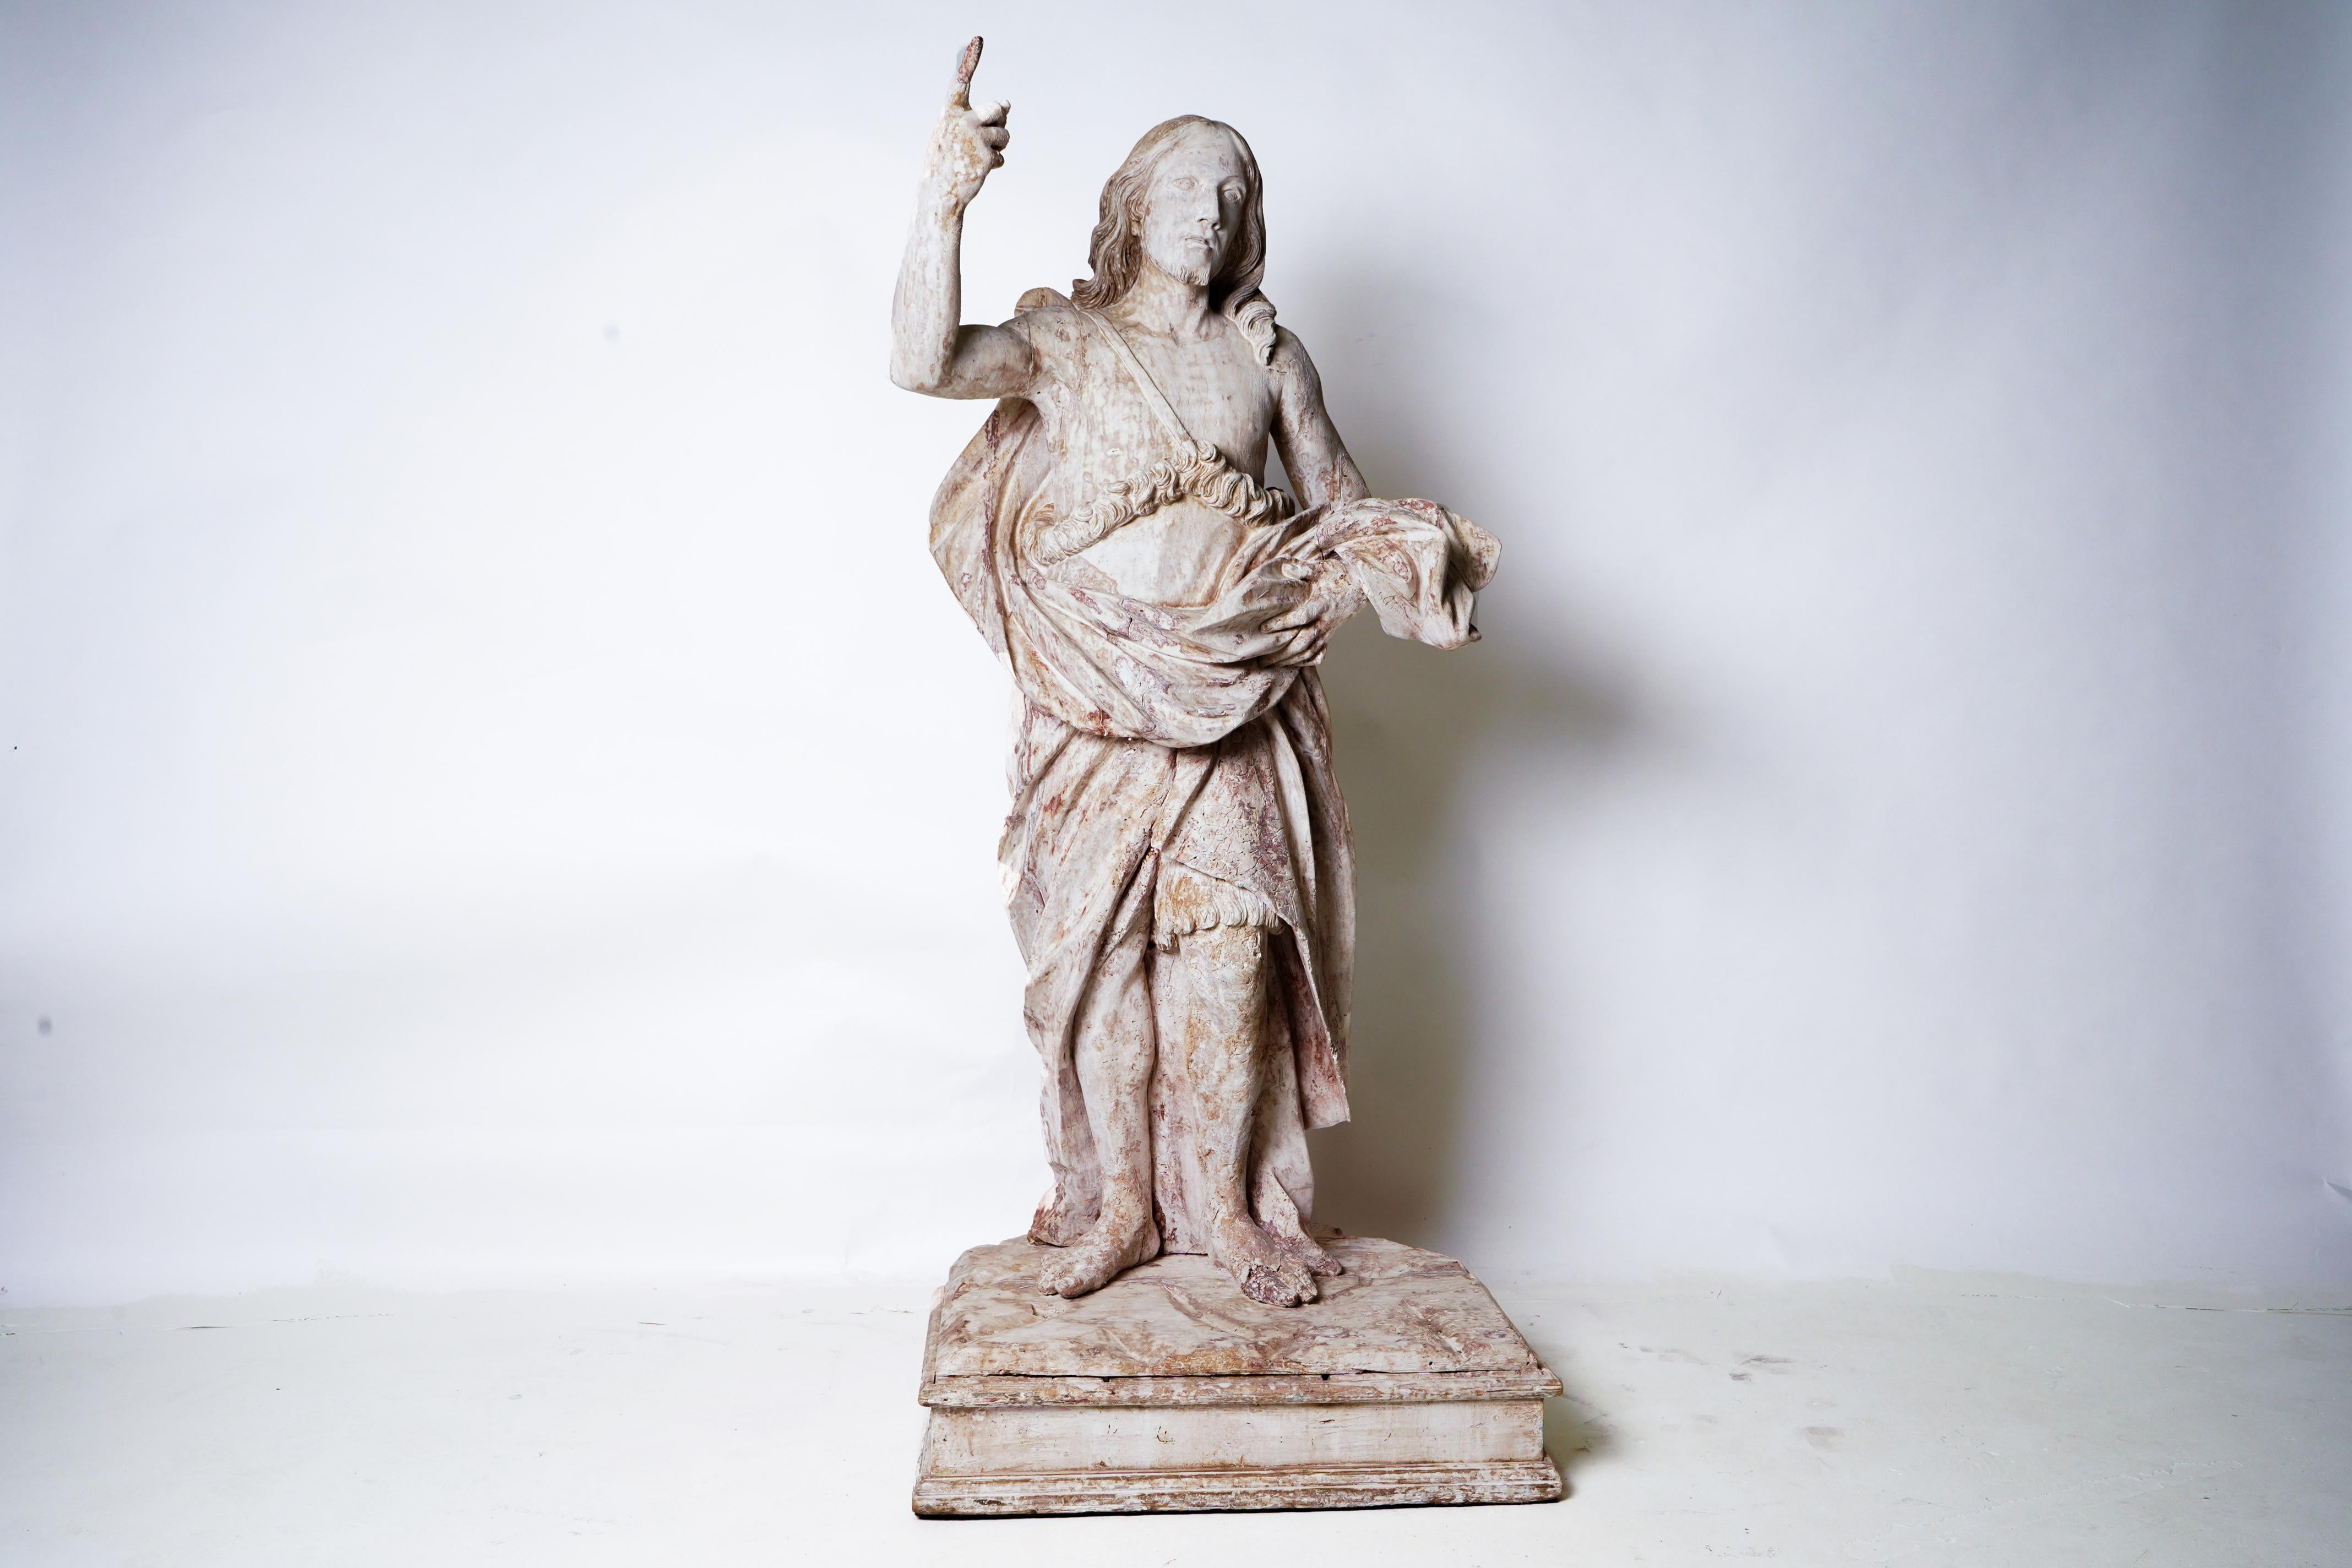 This exceptionally life-like antique sculpture is carved from linden wood and once decorated a French church or cathedral. The figure stands authoritatively, with right arm raised and index finger extended toward heaven. It probably stood on a base